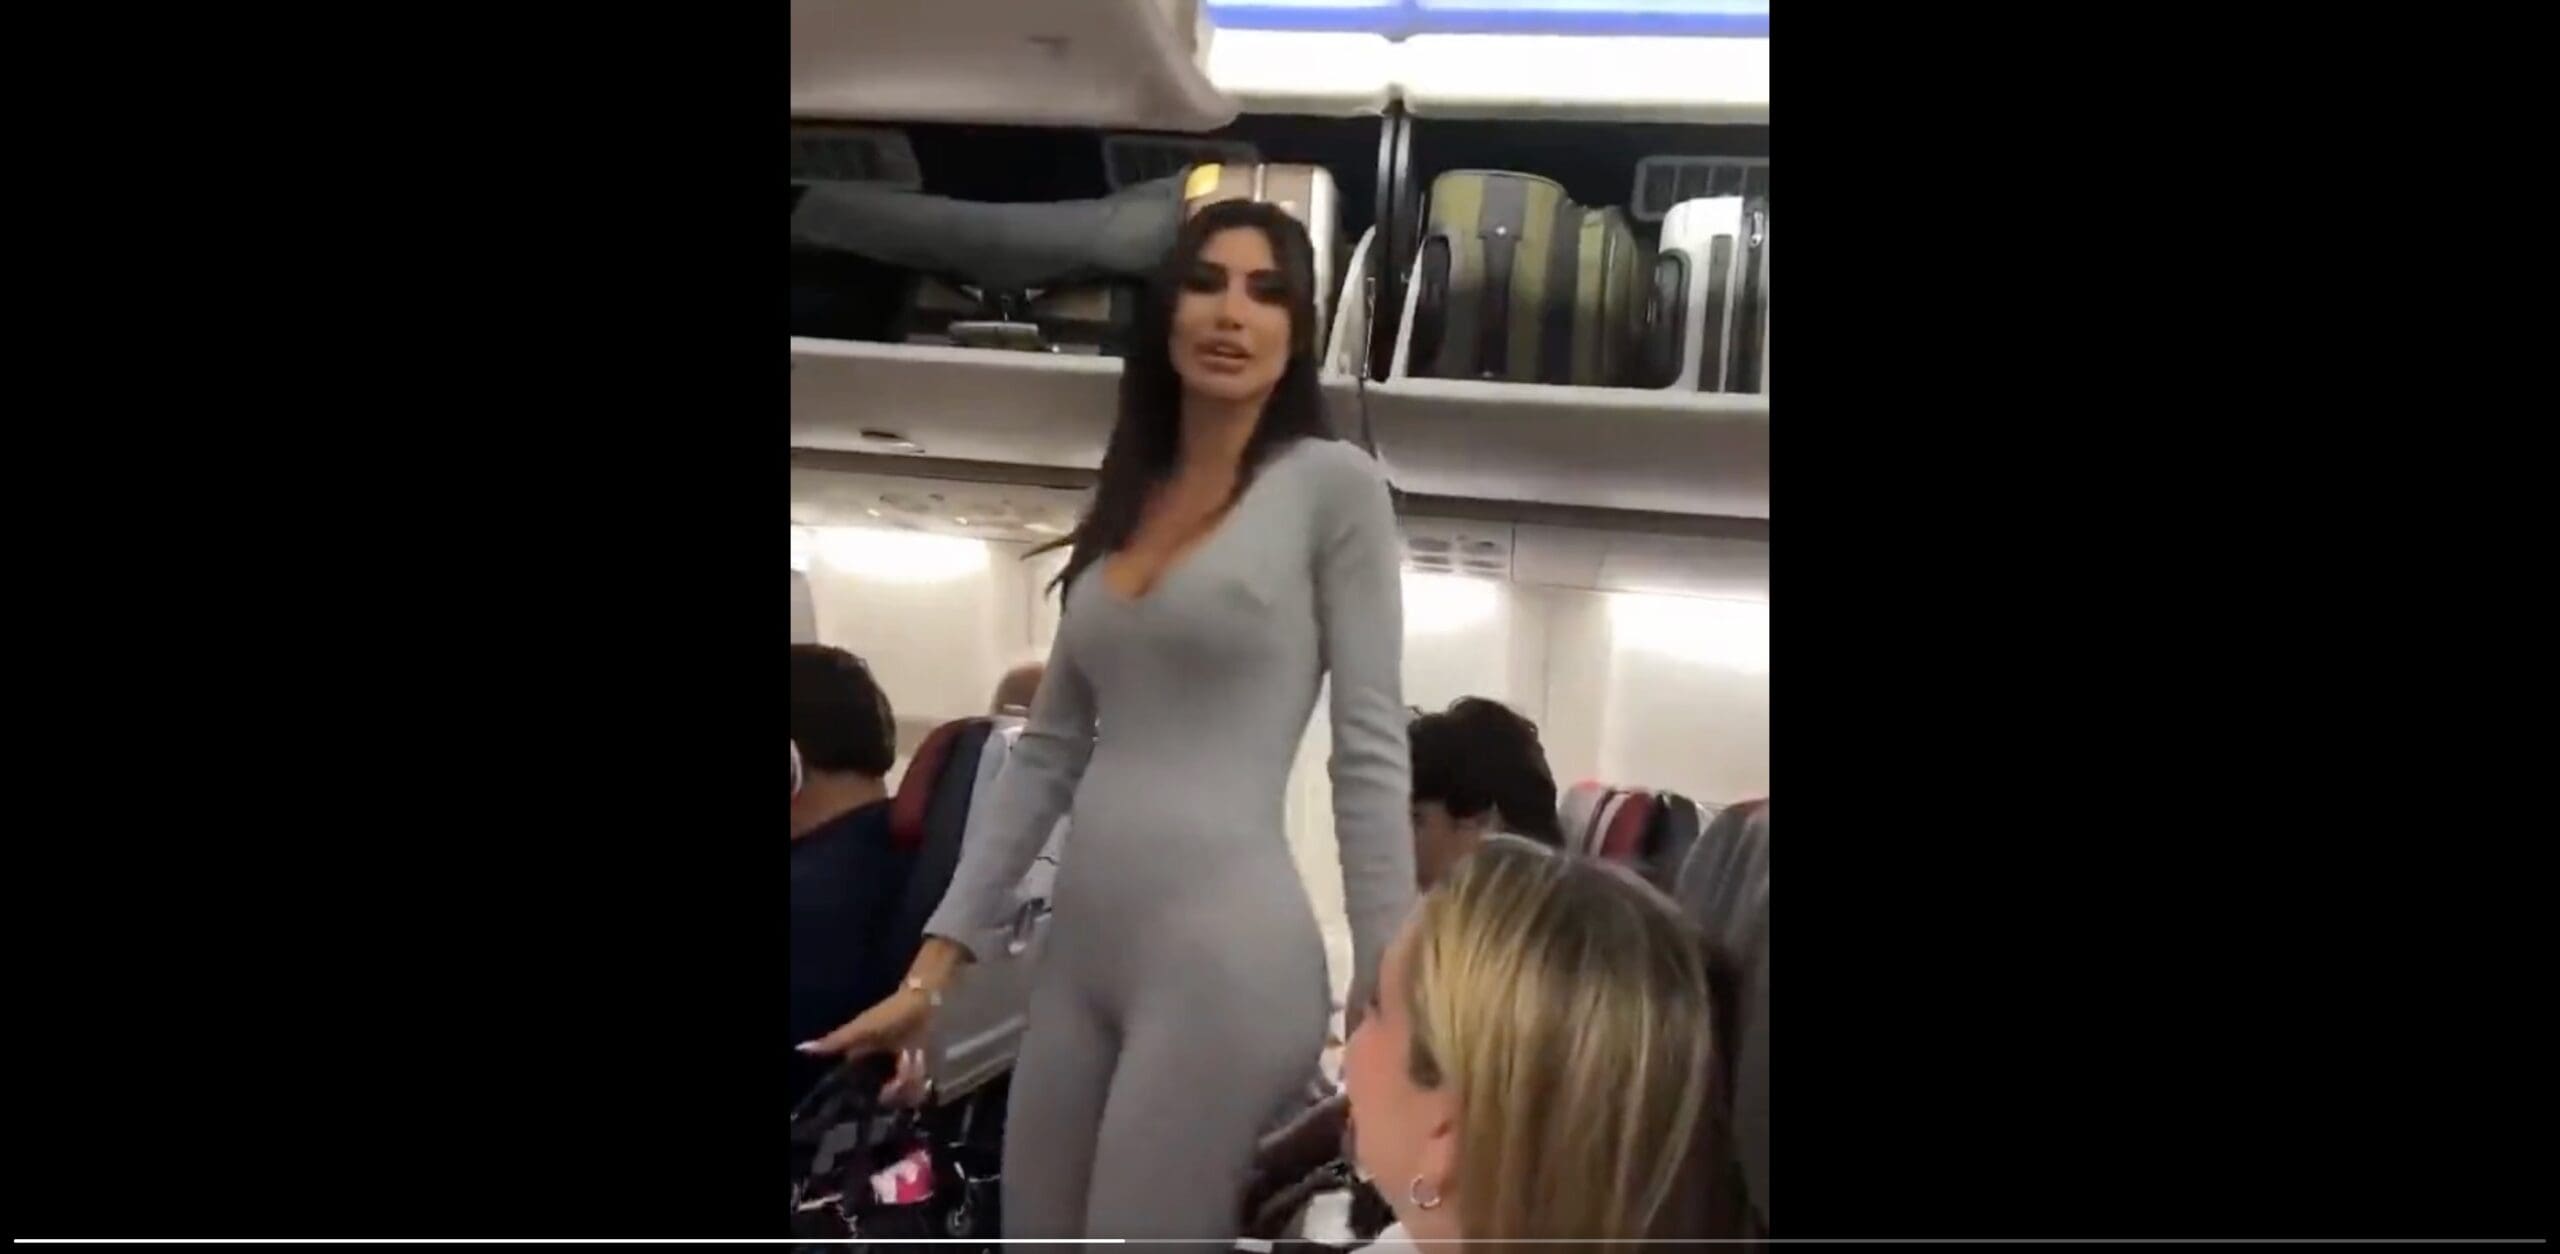 "I'm Instagram Famous, You F***ing Bum" - Entitled "Influencer" Suffers Meltdown Following Argument with Fellow Passenger and is Kicked Off Plane (VIDEO) | The Gateway Pundit